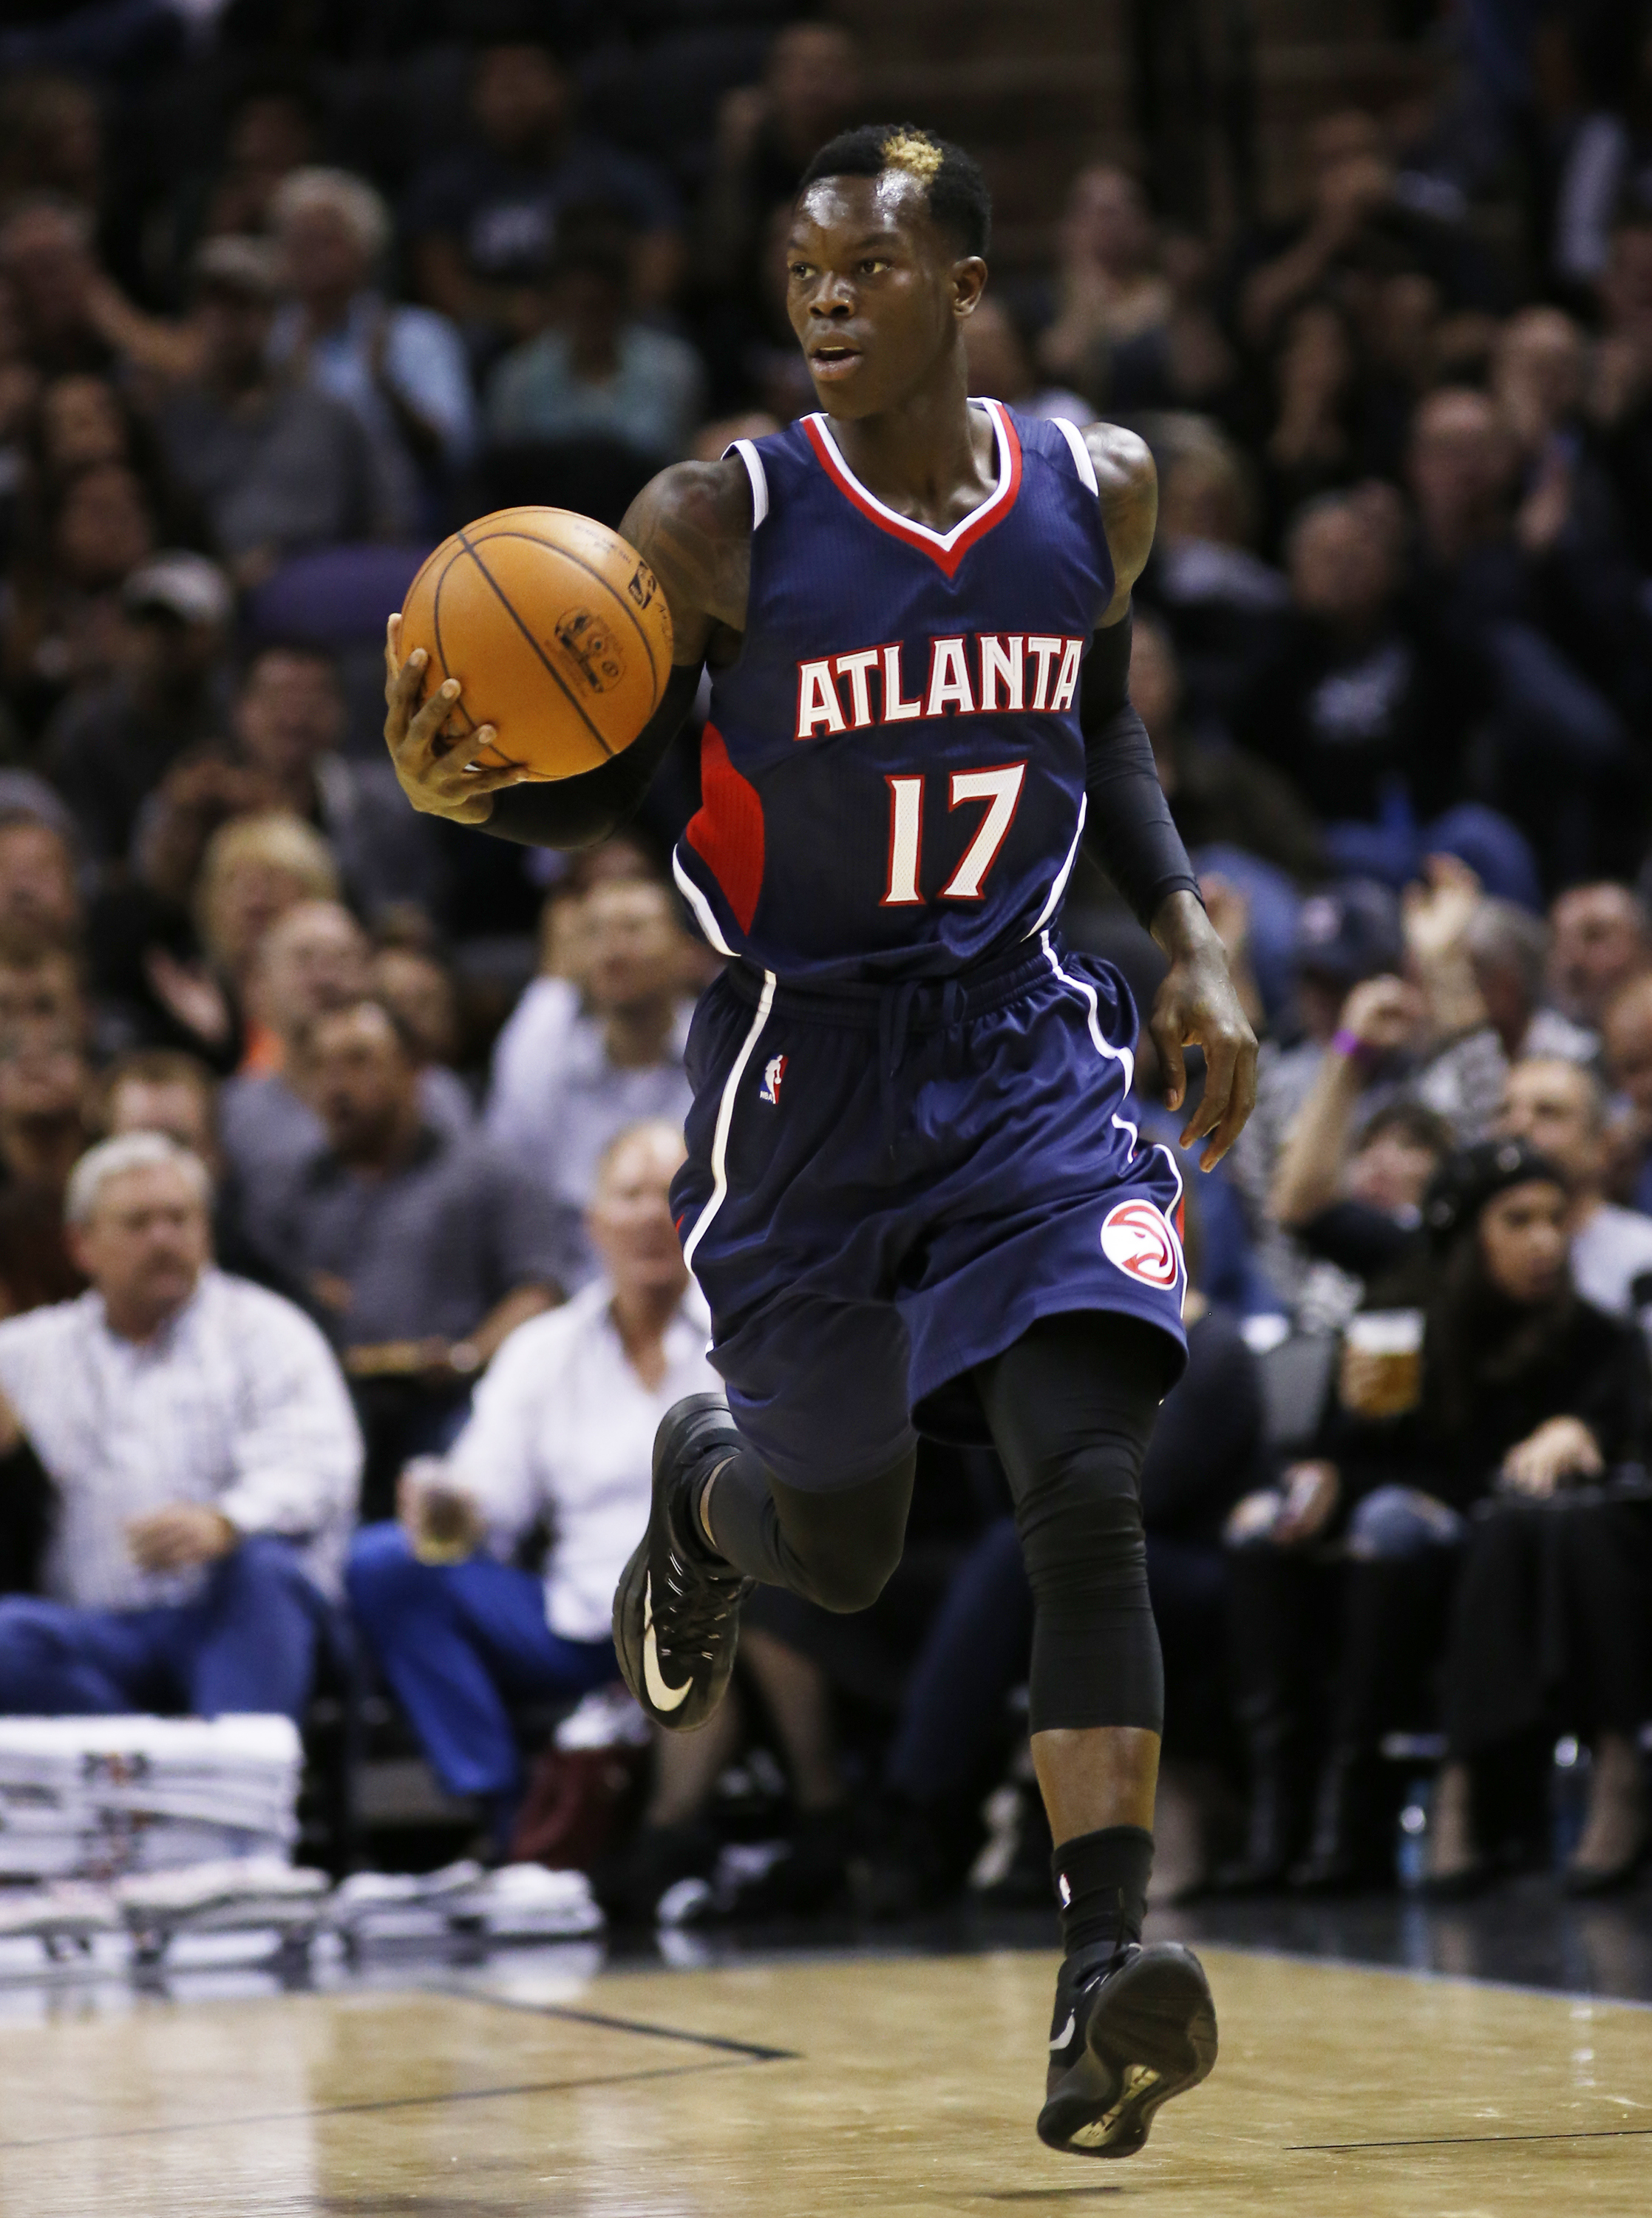 SAN ANTONIO, TX - NOVEMBER 5: Dennis Schroder #17 of the Atlanta Hawks brings the ball up court against the San Antonio Spurs at the AT&T Center on November 5, 2014 in San Antonio, Texas. NOTE TO USER: User expressly acknowledges and agrees that, by downloading to the terms and conditions of the Getty Images License Agreement. (Photo by Chris Covatta/Getty Images)